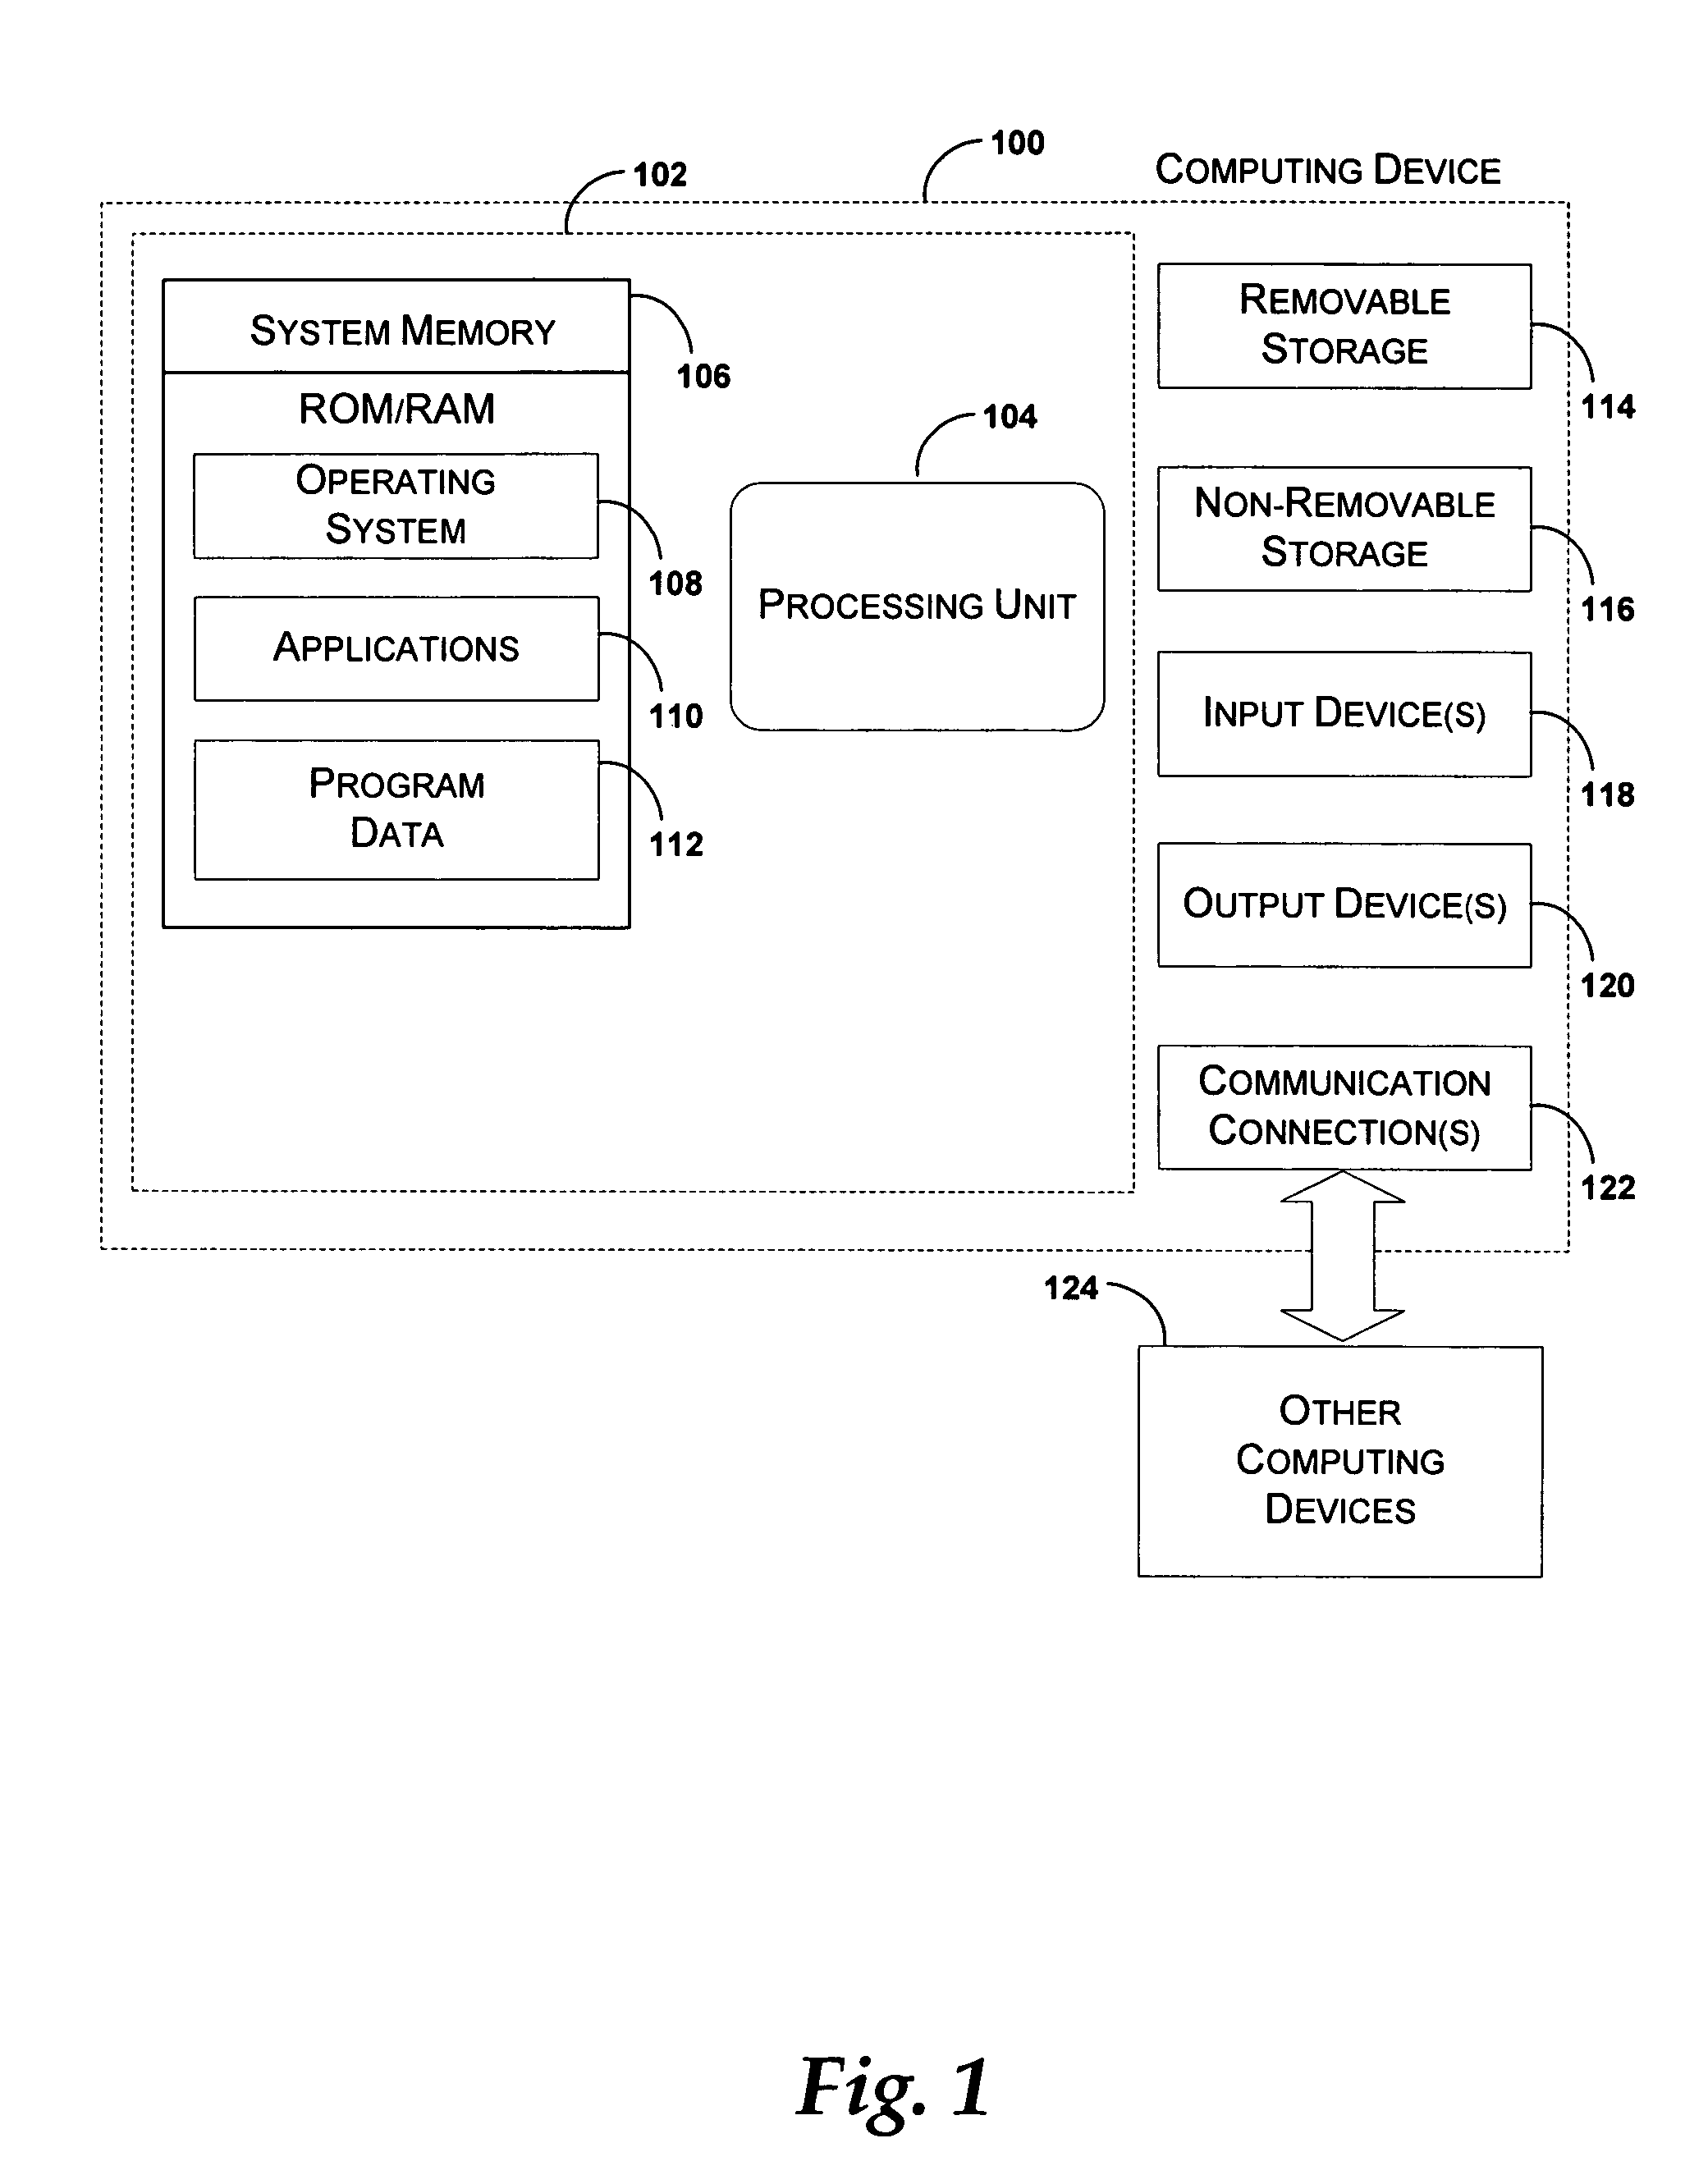 Method and system for automatically displaying content of a window on a display that has changed orientation